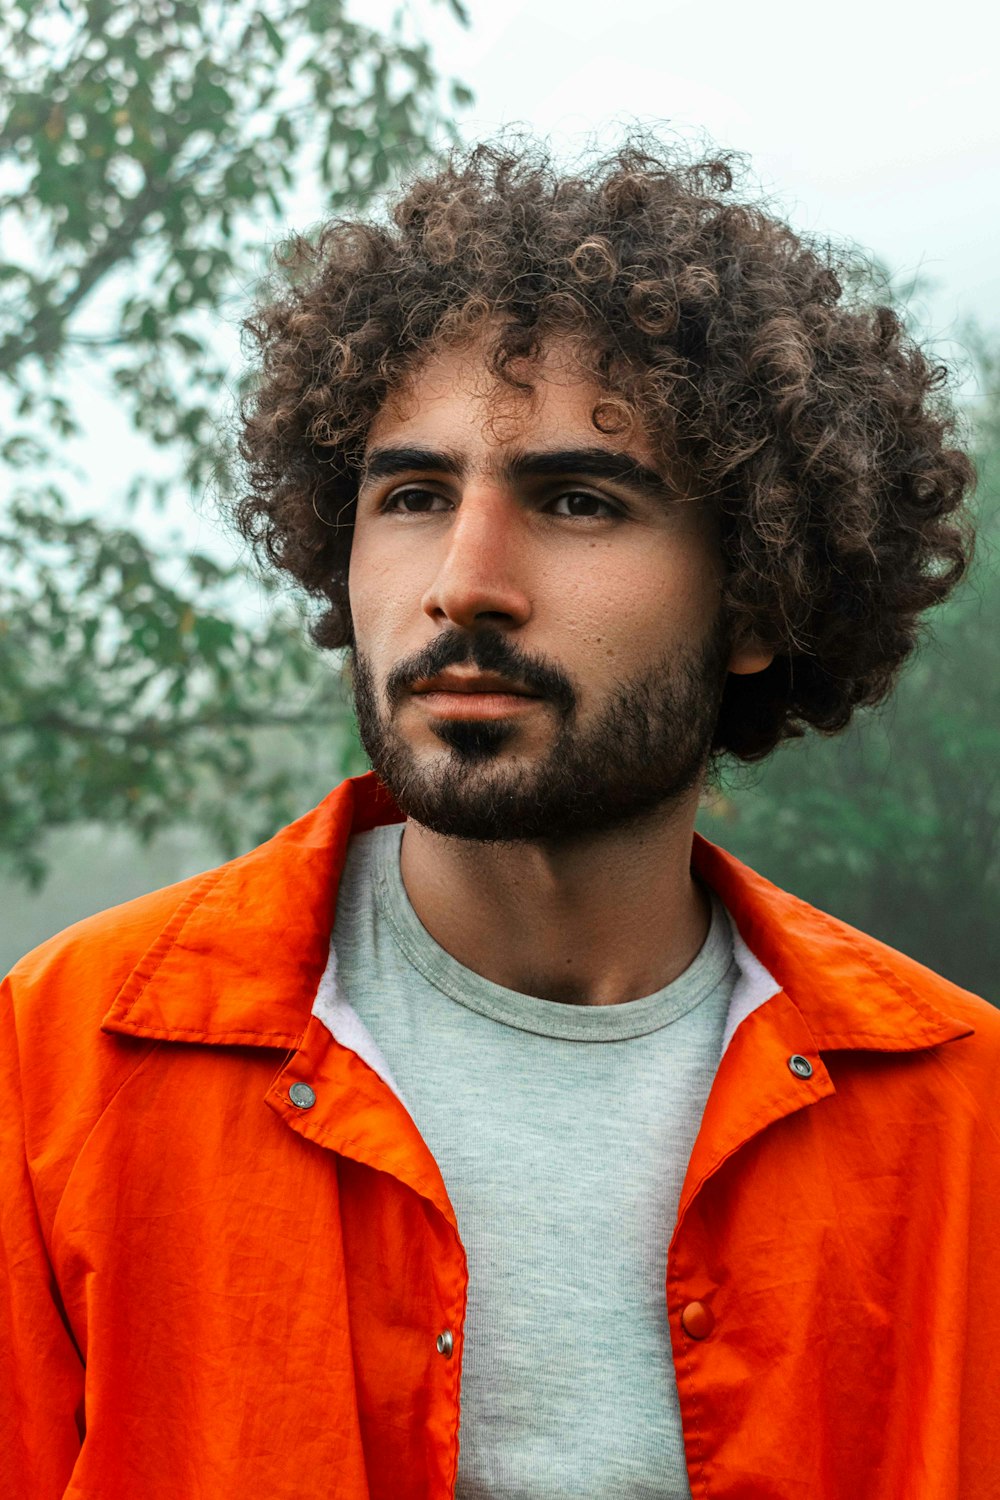 a man with curly hair wearing an orange jacket